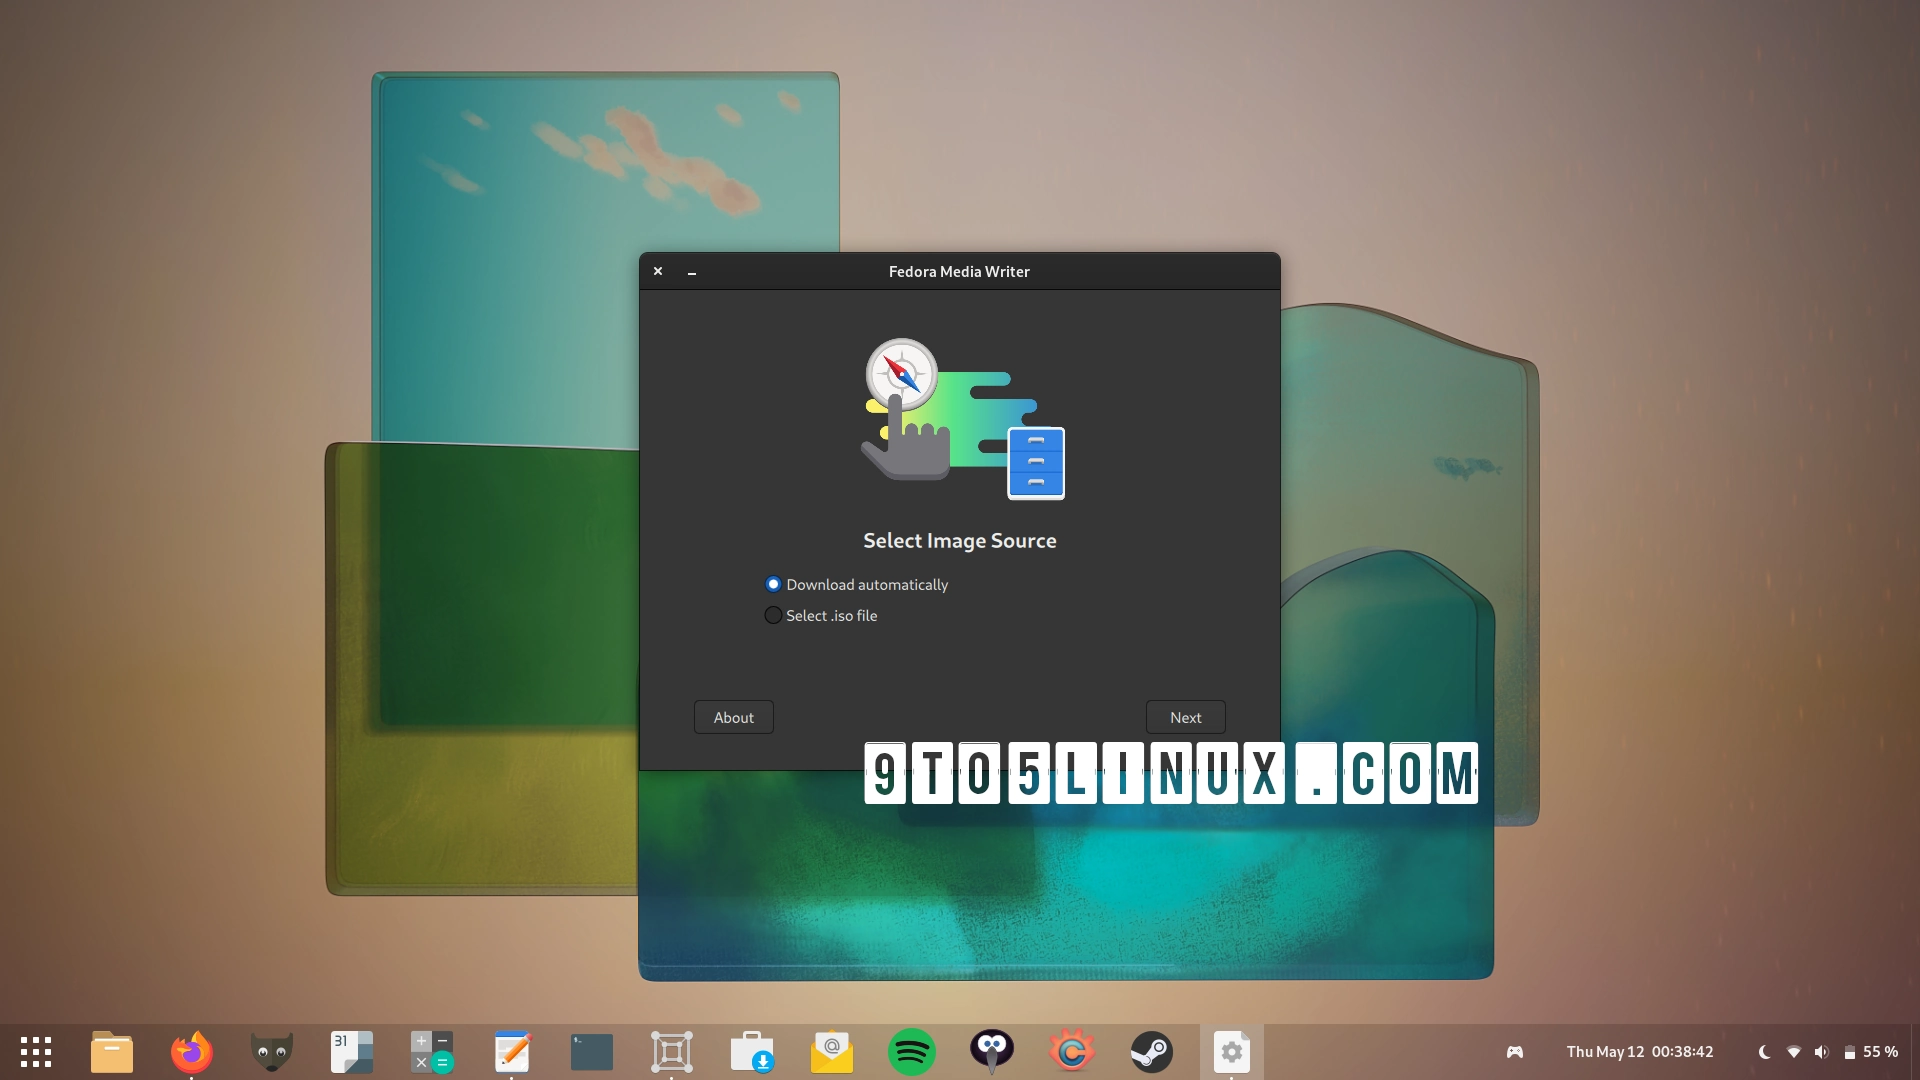 Hands-On with Fedora Media Writer 5.0: New Qt6 UI, Fedora Kinoite Support, and More